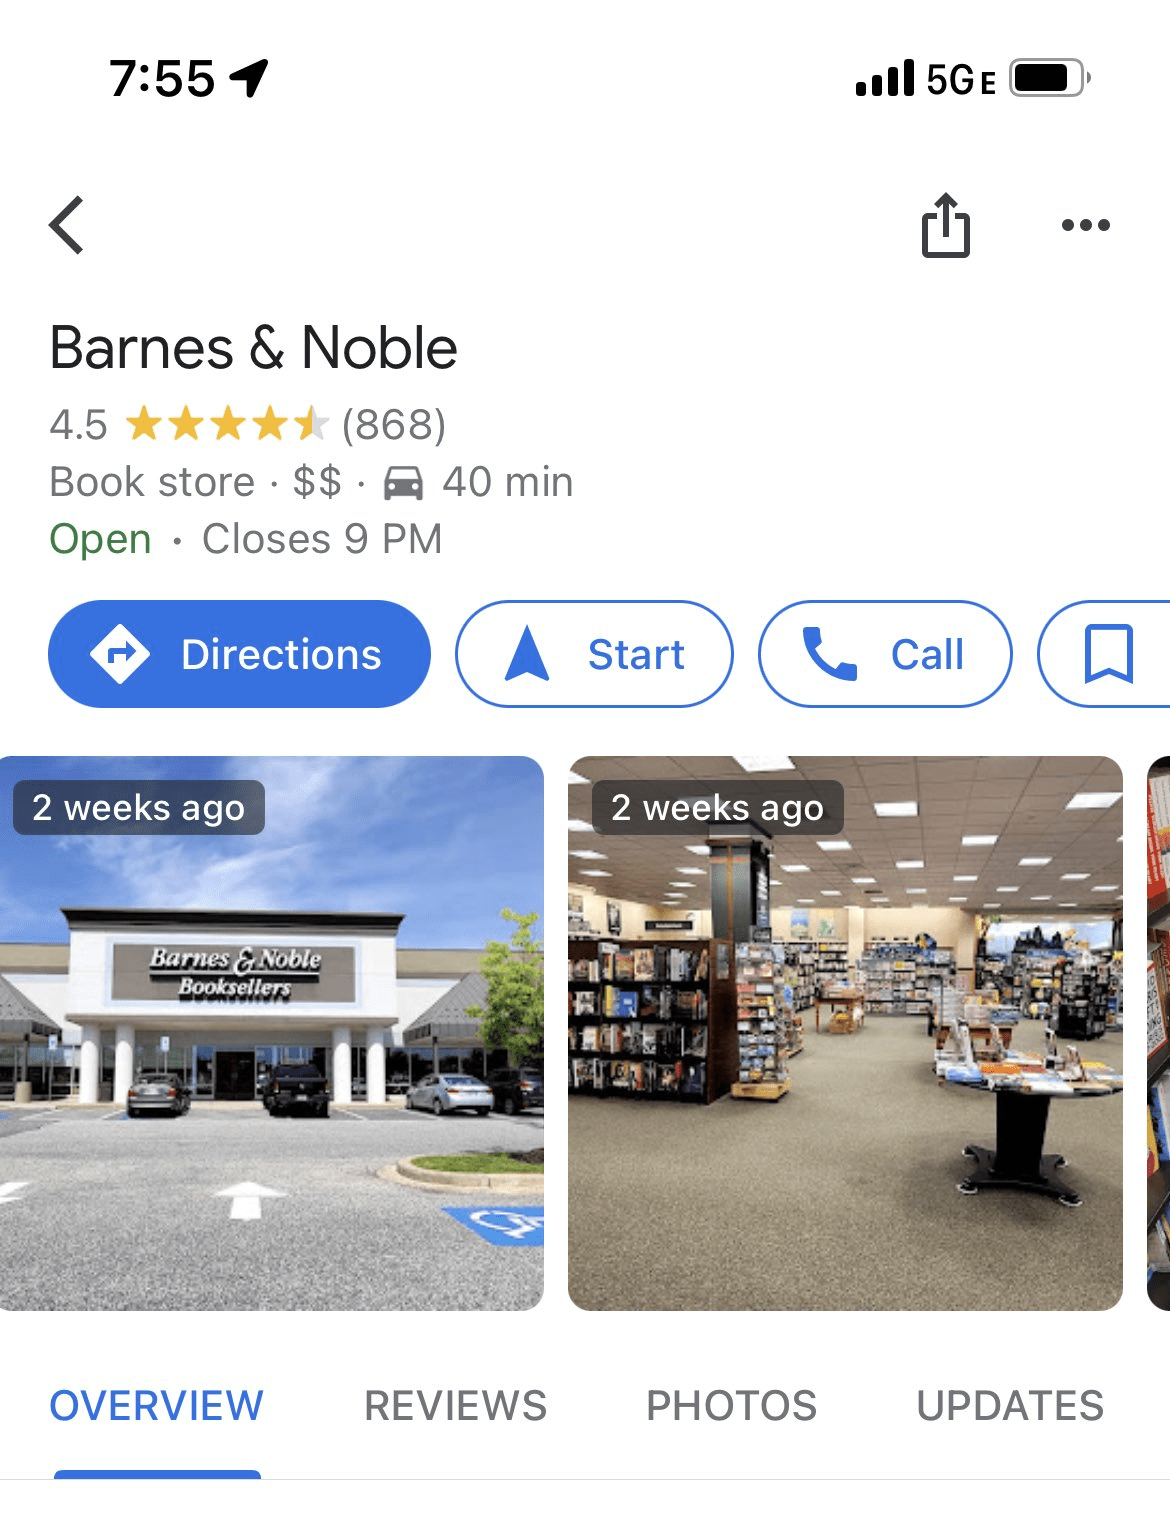 An image of Barnes and Noble search results with a few images and the time in which they were uploaded